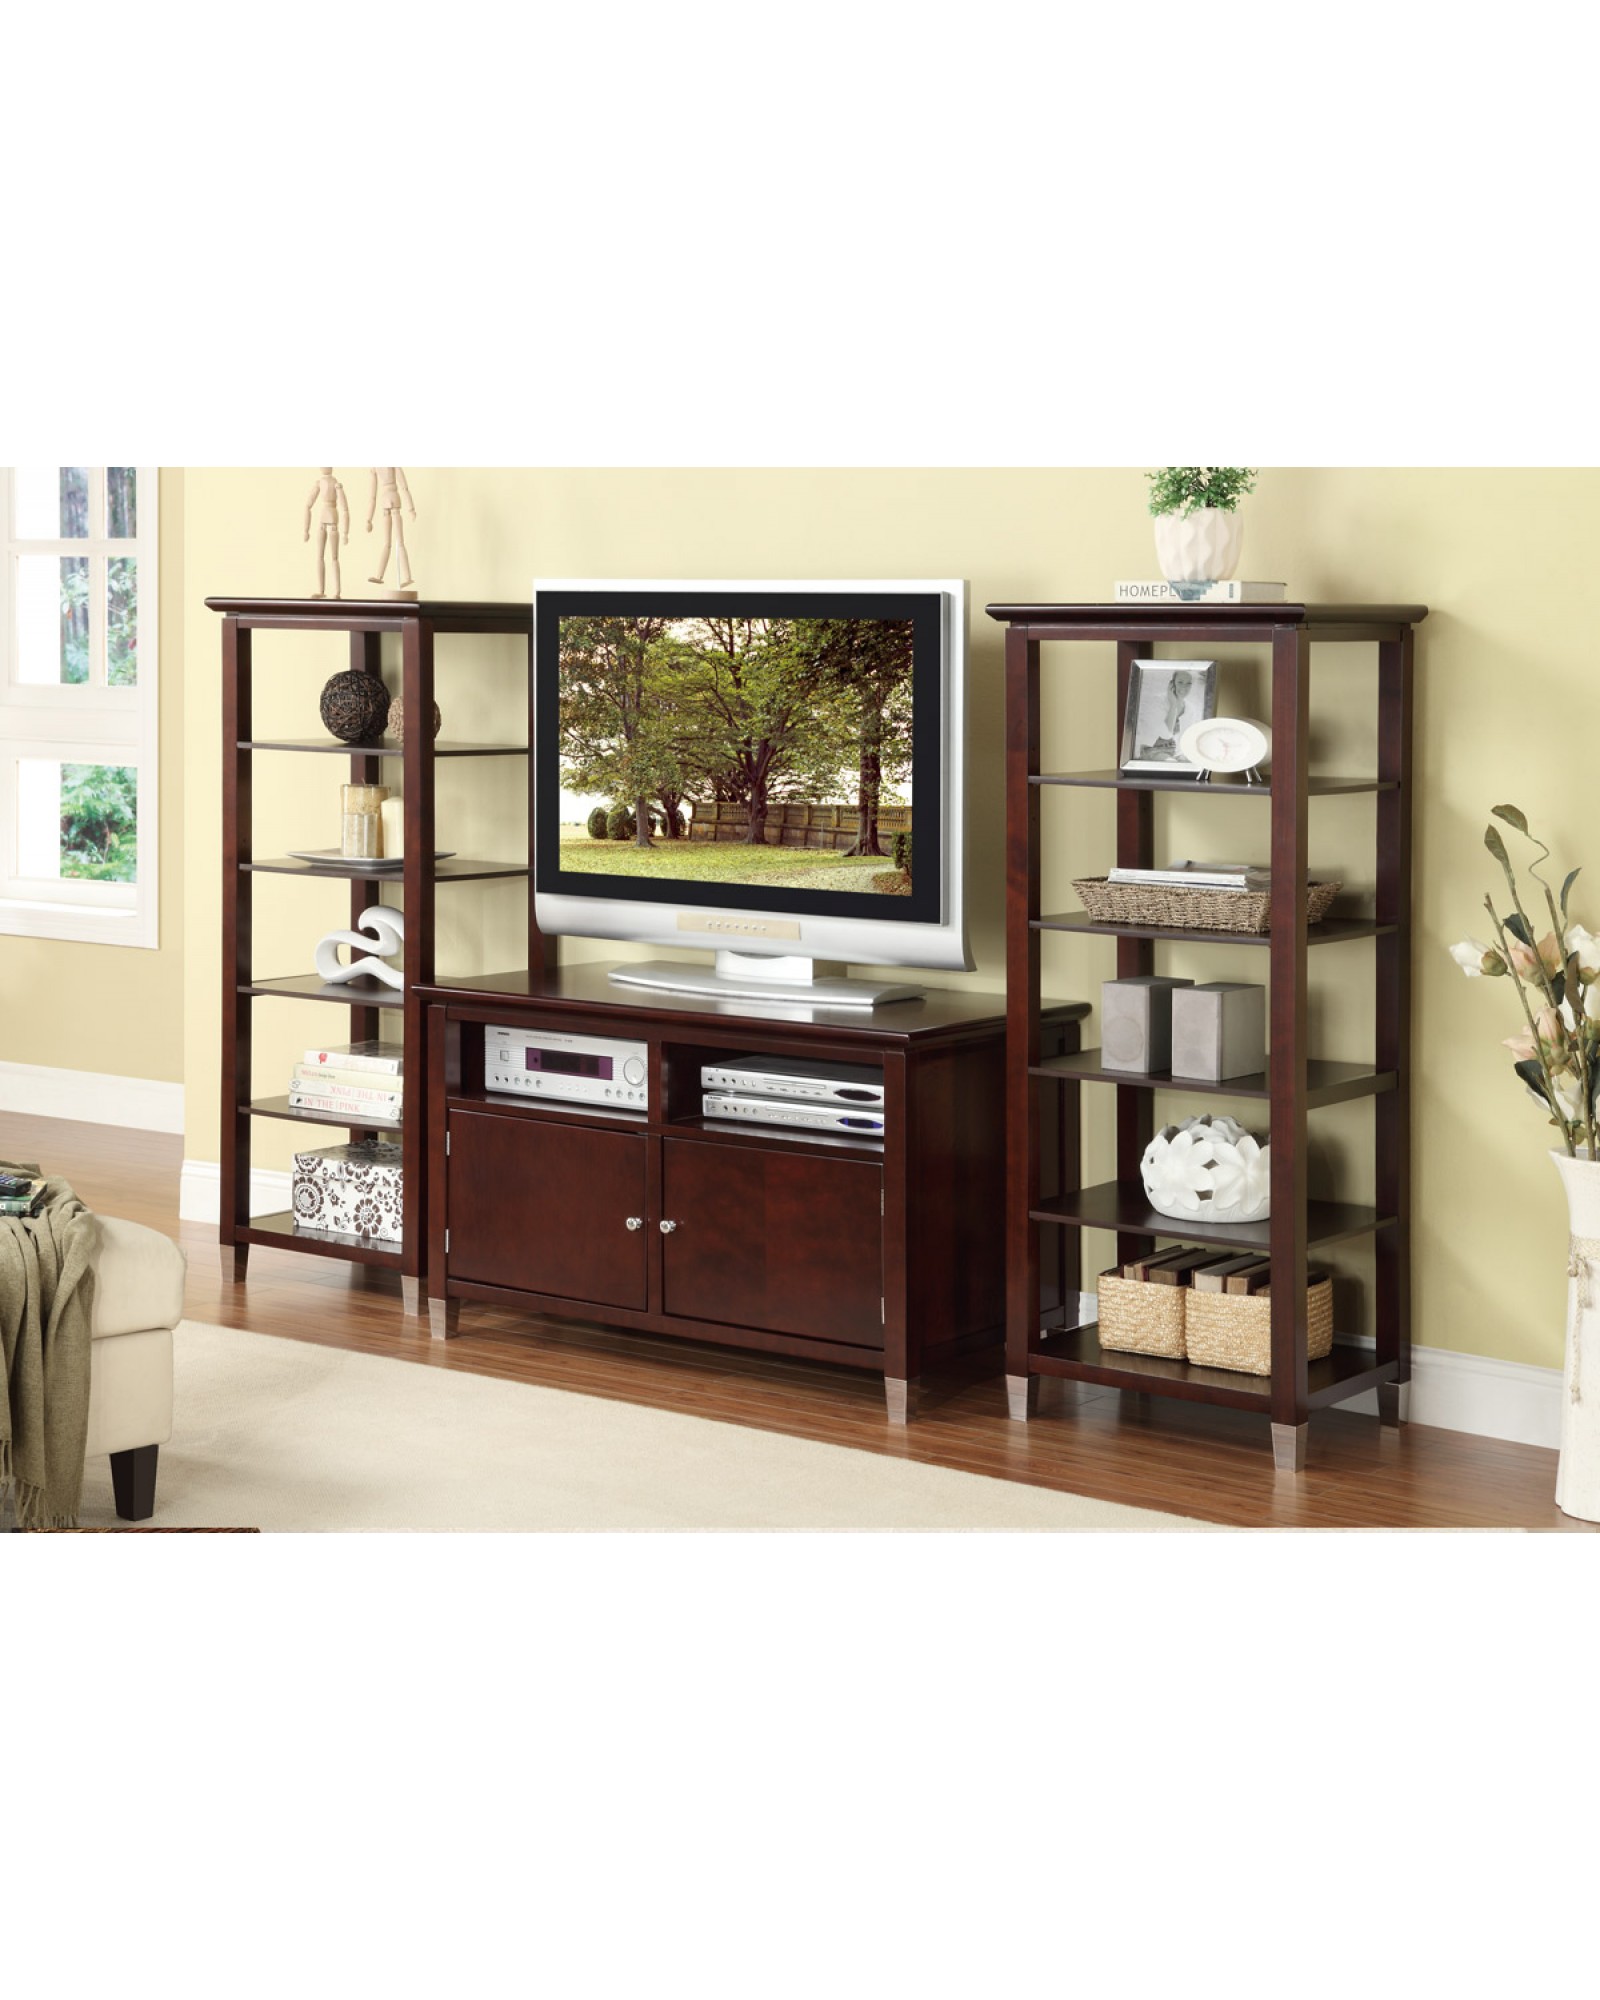 Contemporary TV Stand with Storage and Optional Media Shelves, Dark Cherry Finish